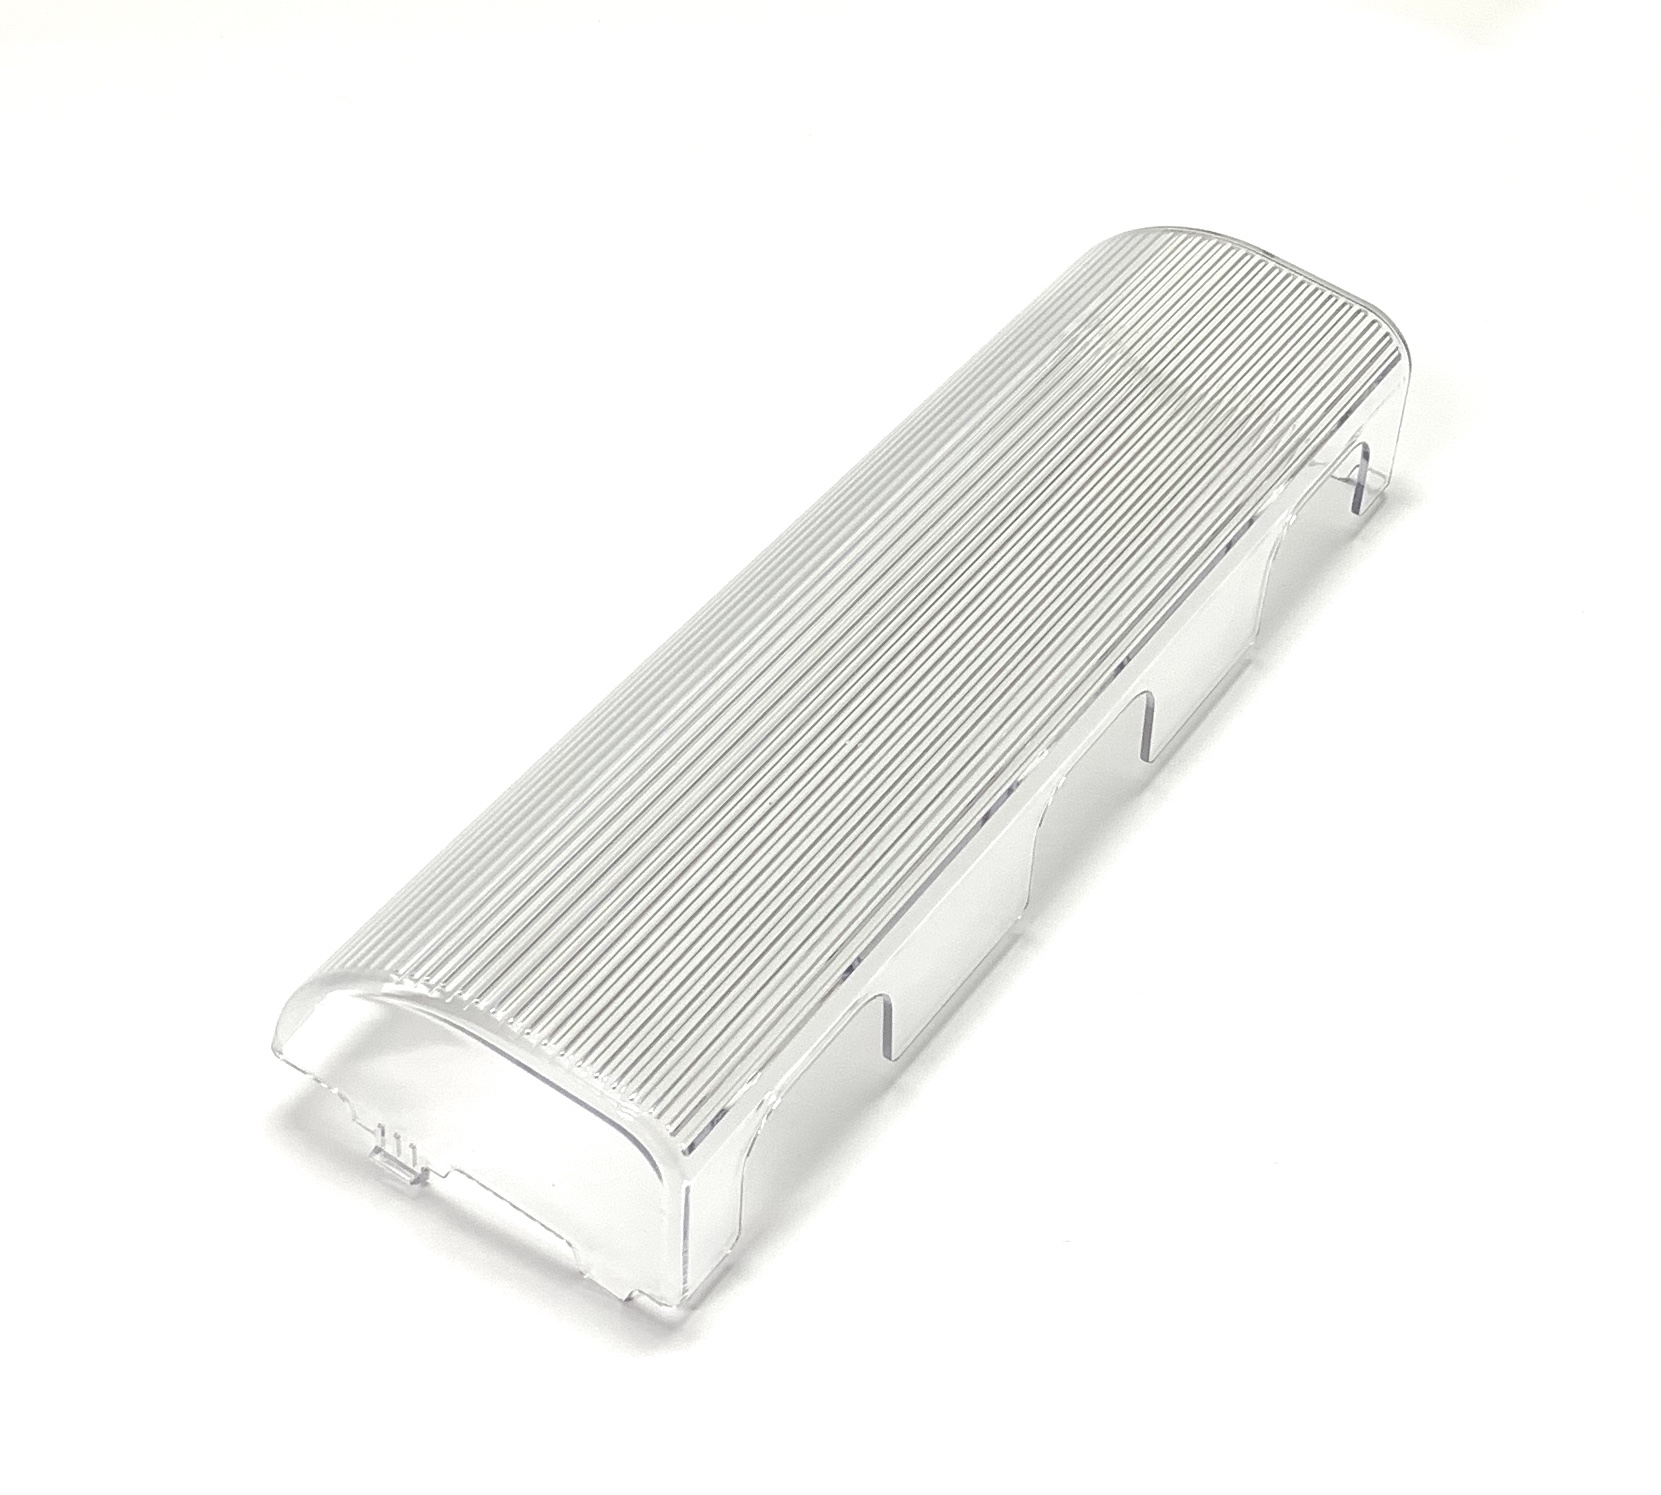 LG OEM LG Refrigerator Section Light Lamp Cover Lens Originally Shipped With LSC27926ST, GML267BQRY, LSC27950SW